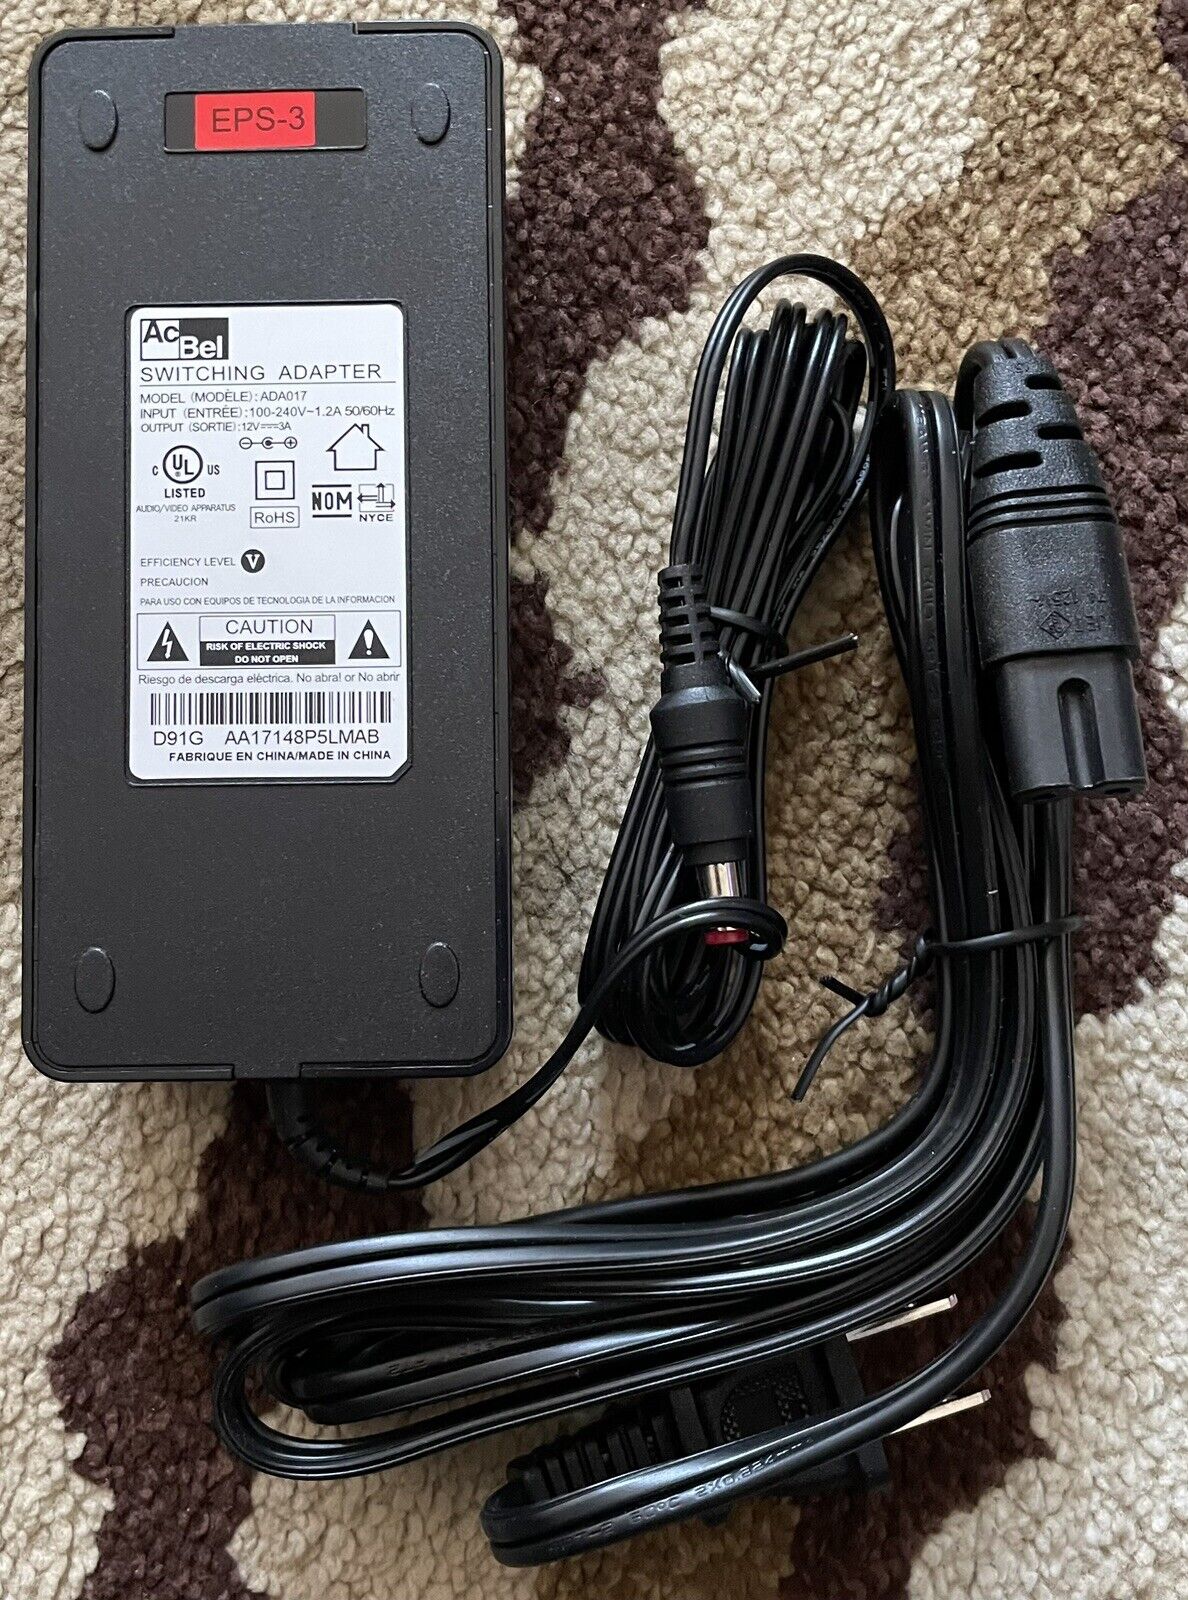 *Brand NEW*100-240V 1.2A 50/60Hz 12V 3A AcBel EPS-3 Switching Adapter ADA017